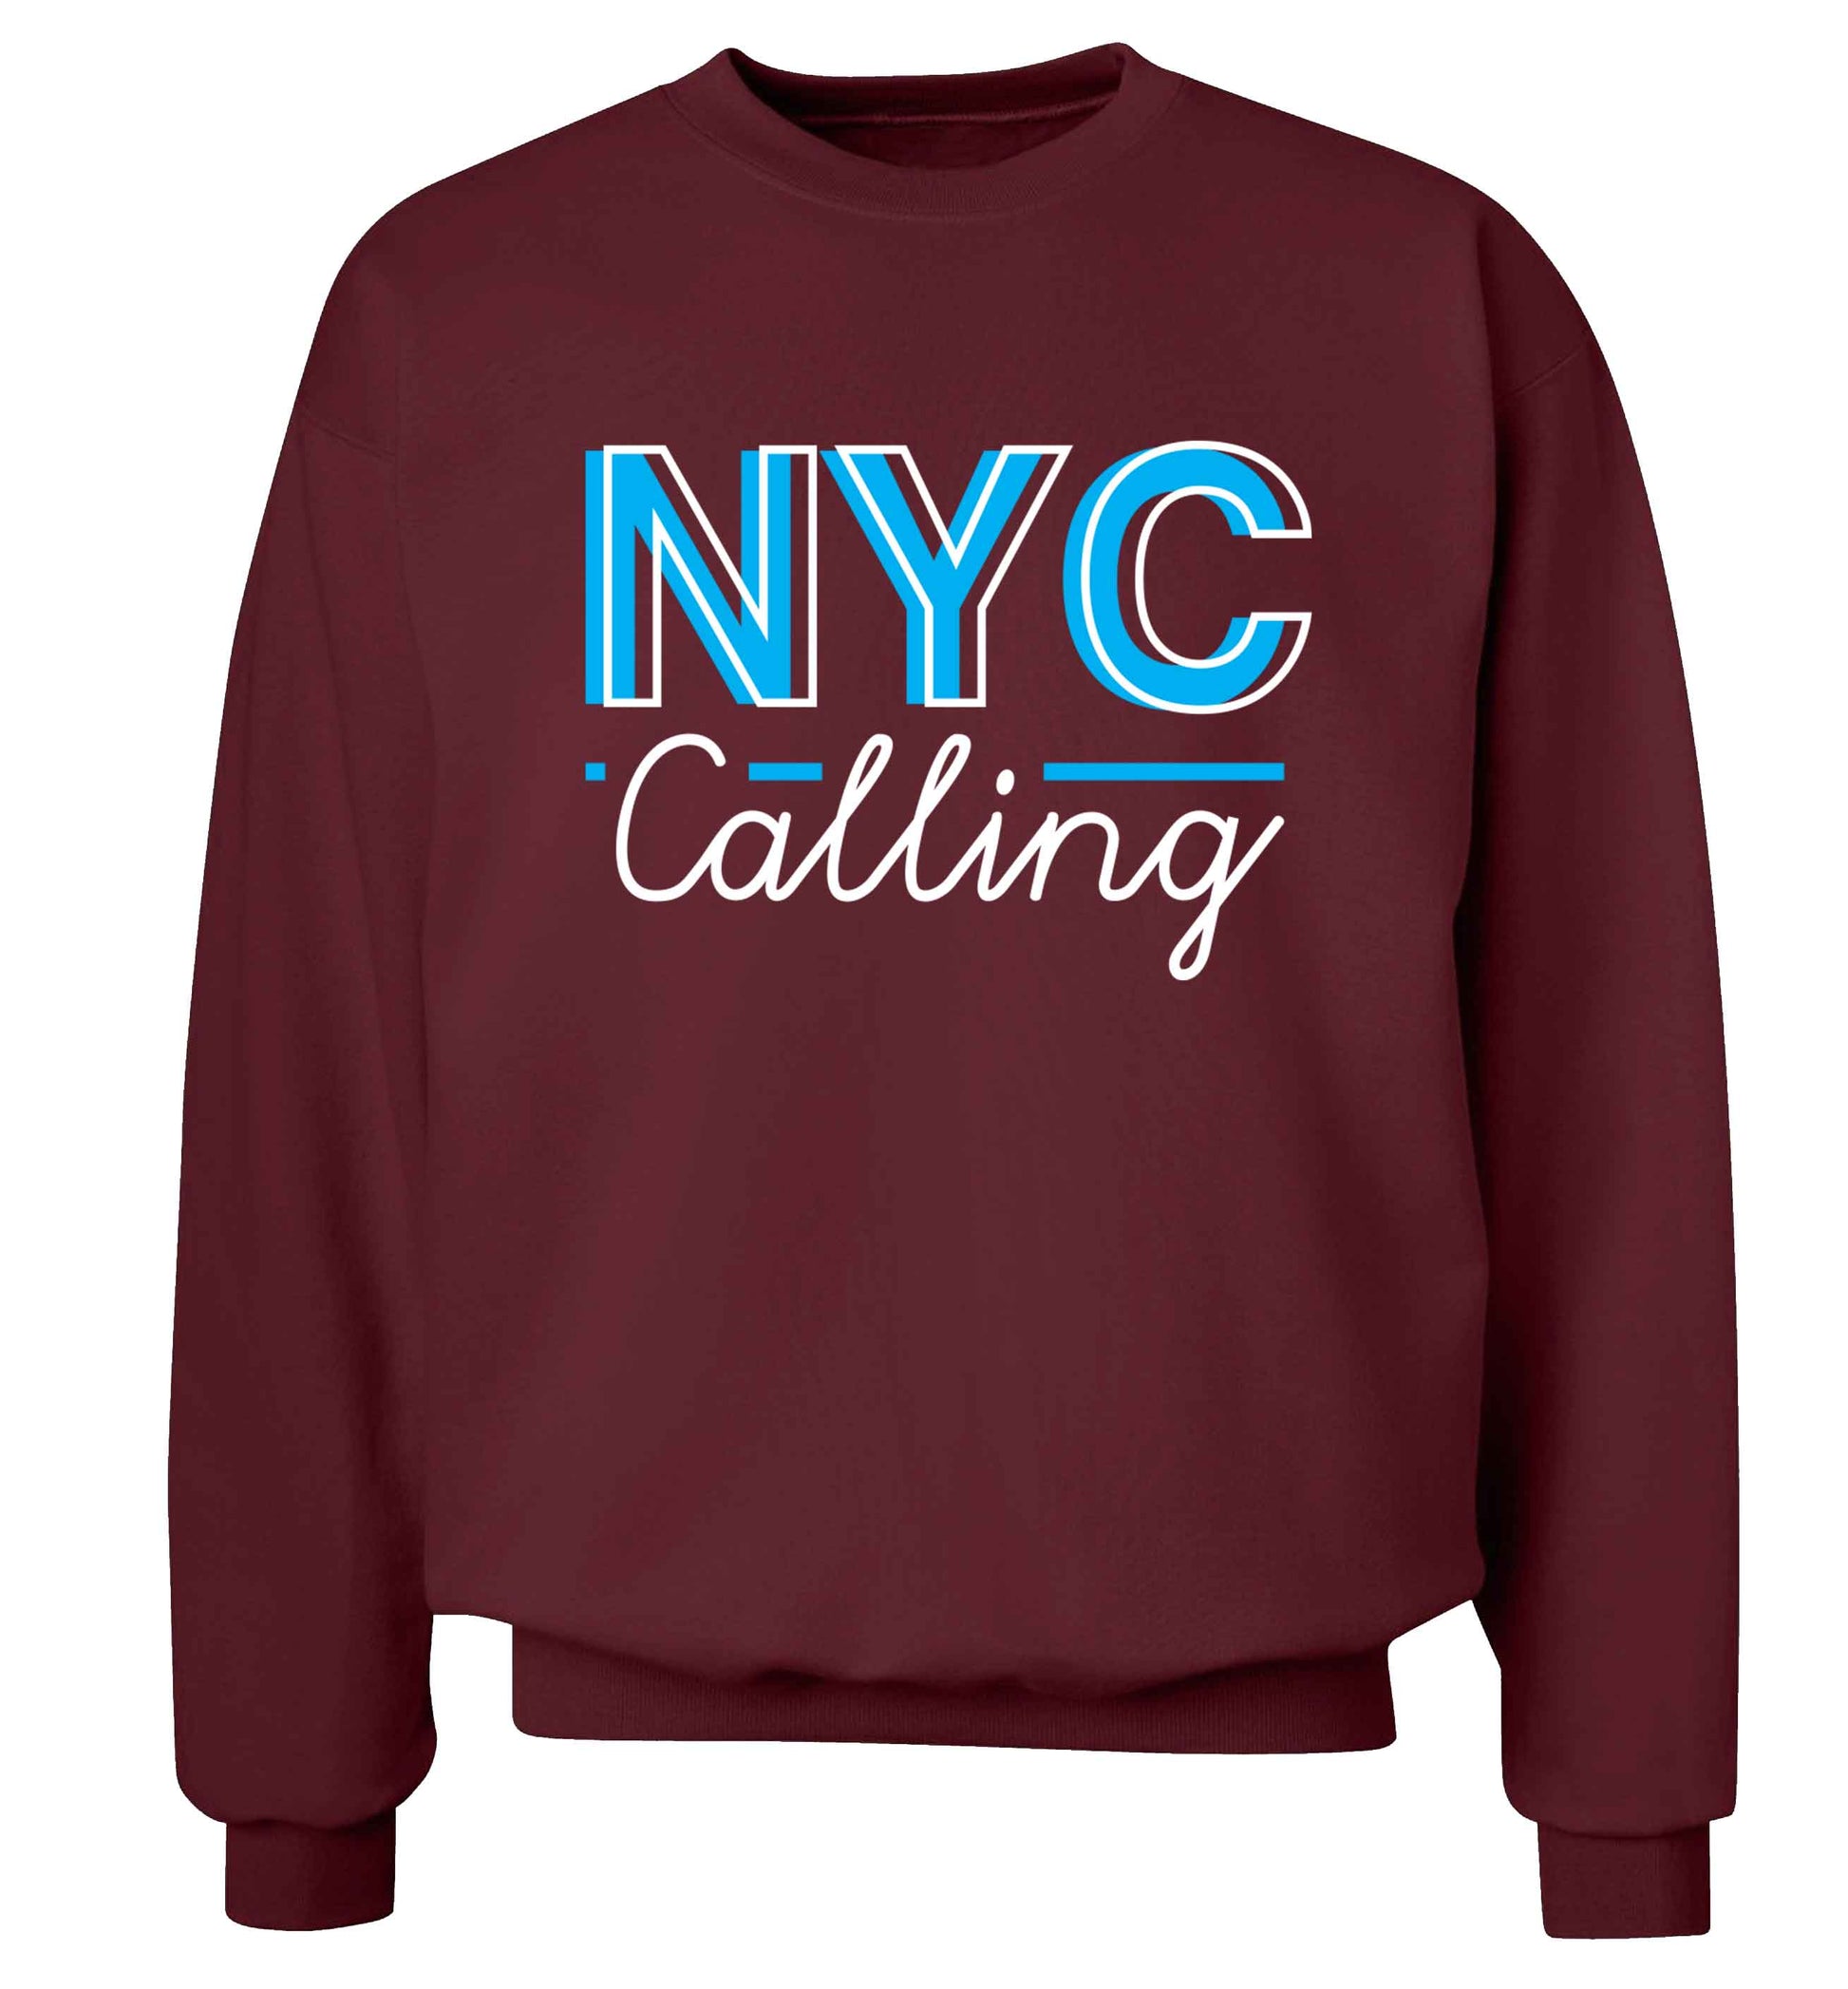 NYC calling Adult's unisex maroon Sweater 2XL